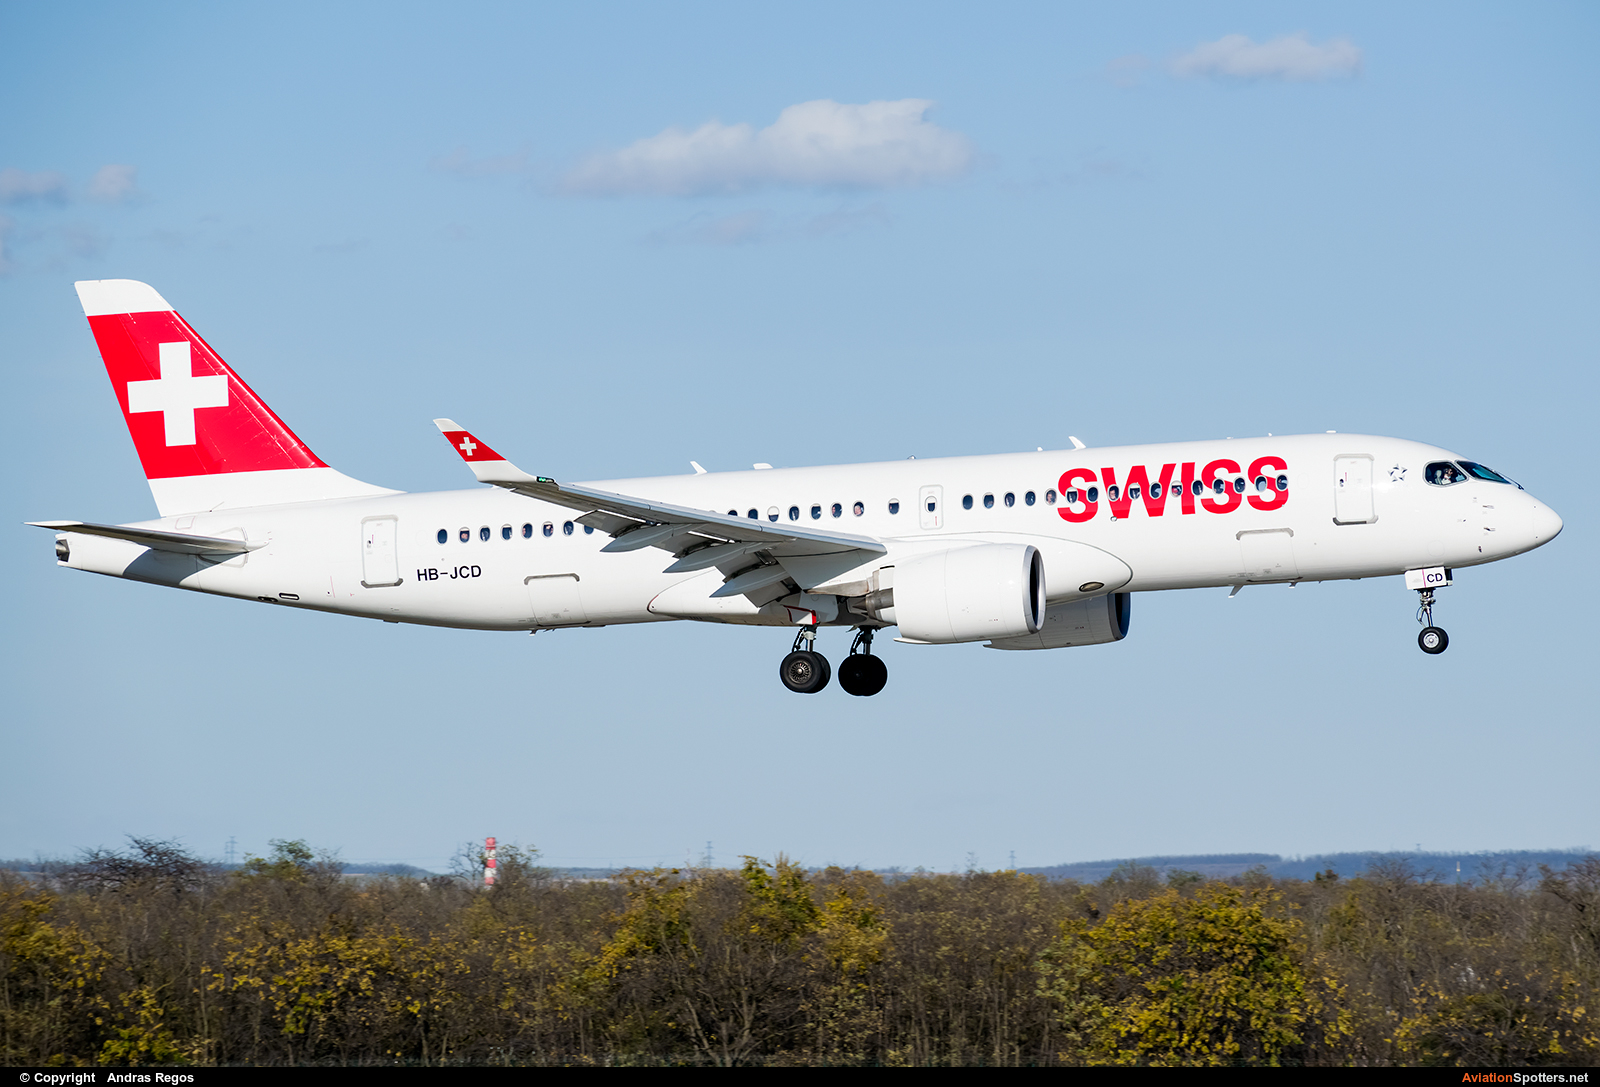 Swiss Airlines  -  BD-500-1A10 C Series 100  (HB-JCD) By Andras Regos (regos)